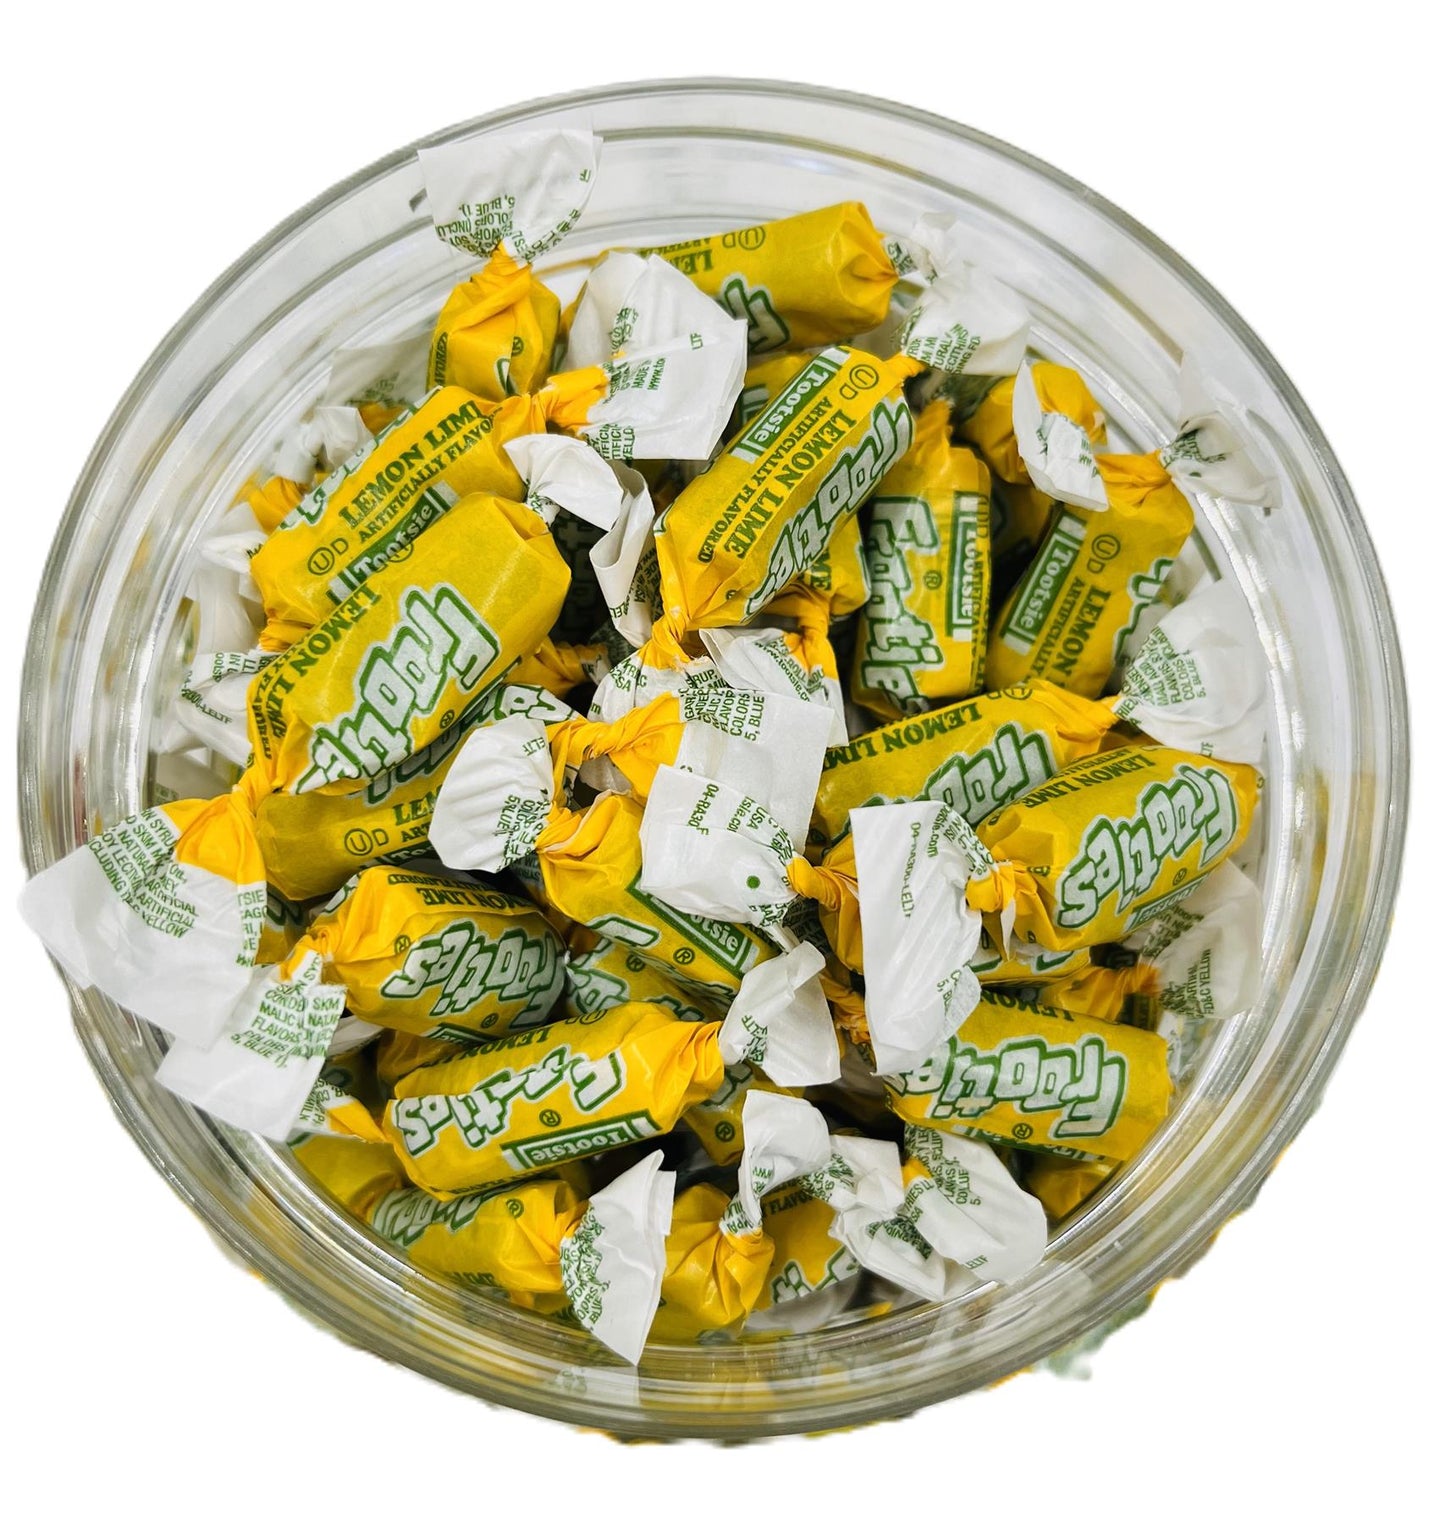 Simway Sweets Jar 680g - Tootsie Frooties Lemon & Lime Flavour - Individually Wrapped American Sweets - Approximately 180 Pieces